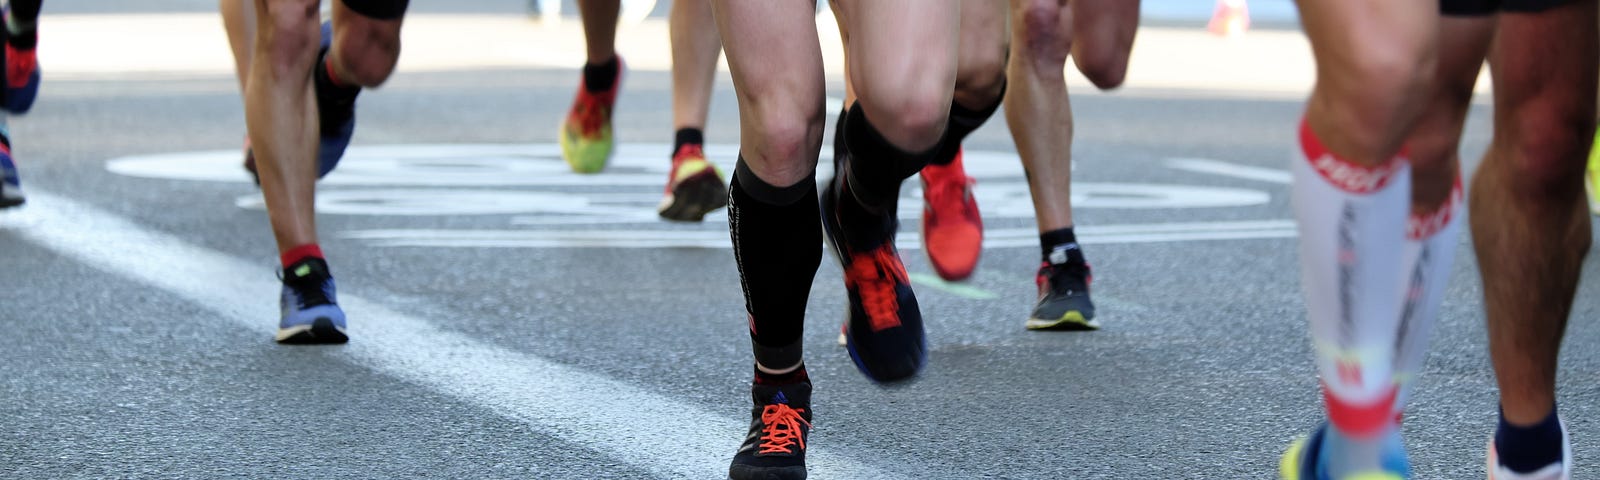 A group of legs, all pictured from below the upper thigh, wearing shorts and colorful running shoes, pound the pavement in what looks like an organized running race.